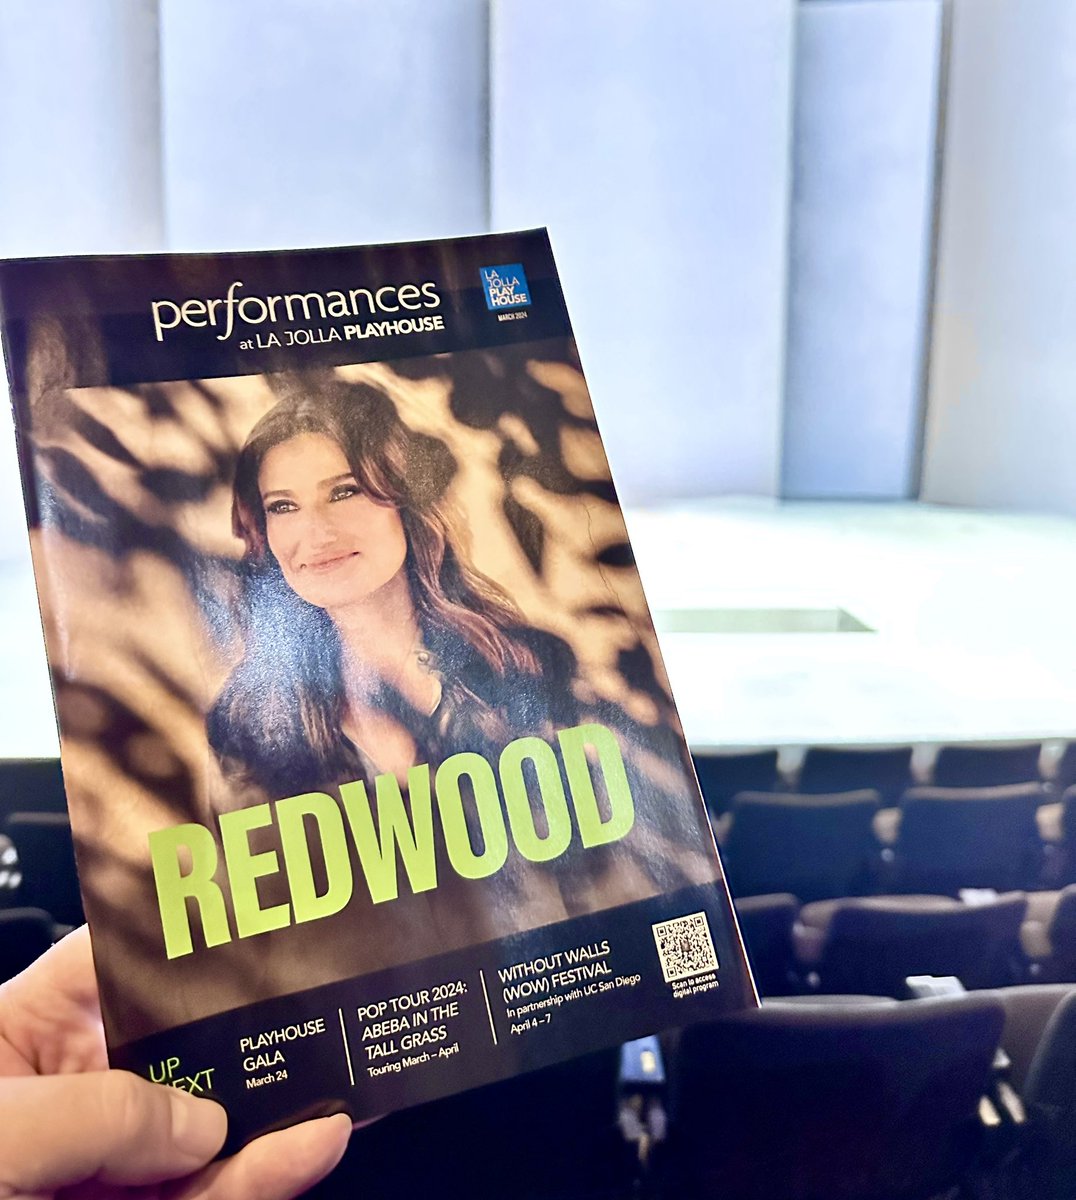 Tonight’s playbill. Seeing @idinamenzel for the first time! Break legs! Or is it break limbs? 🌲🤩🎭🎶
#RedwoodMusical